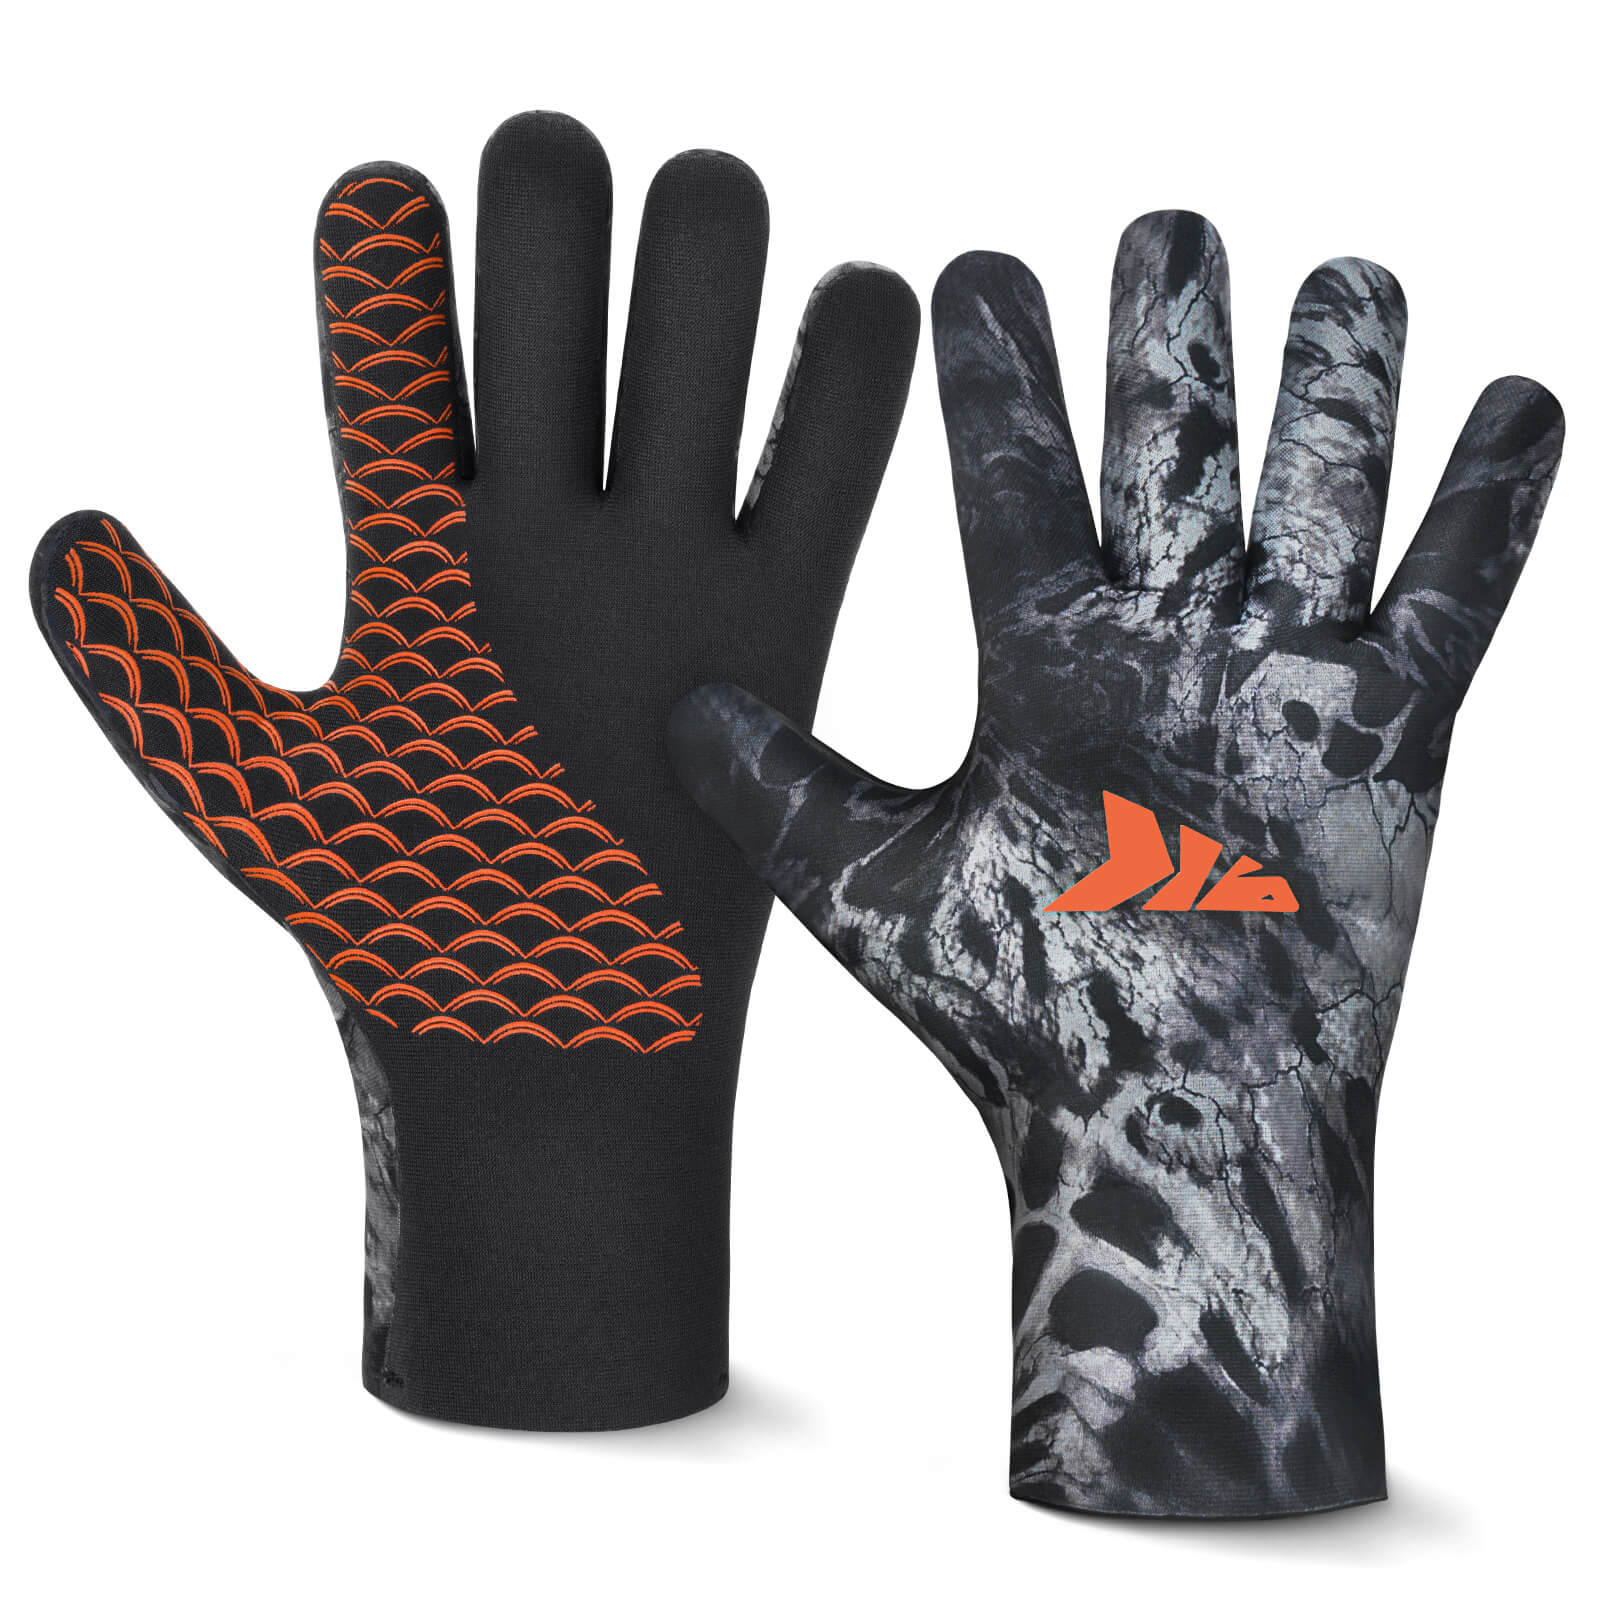 Celsius Black Neoprene Fishing Gloves X-Large - Great For Ice Fishing, Cold  Weather